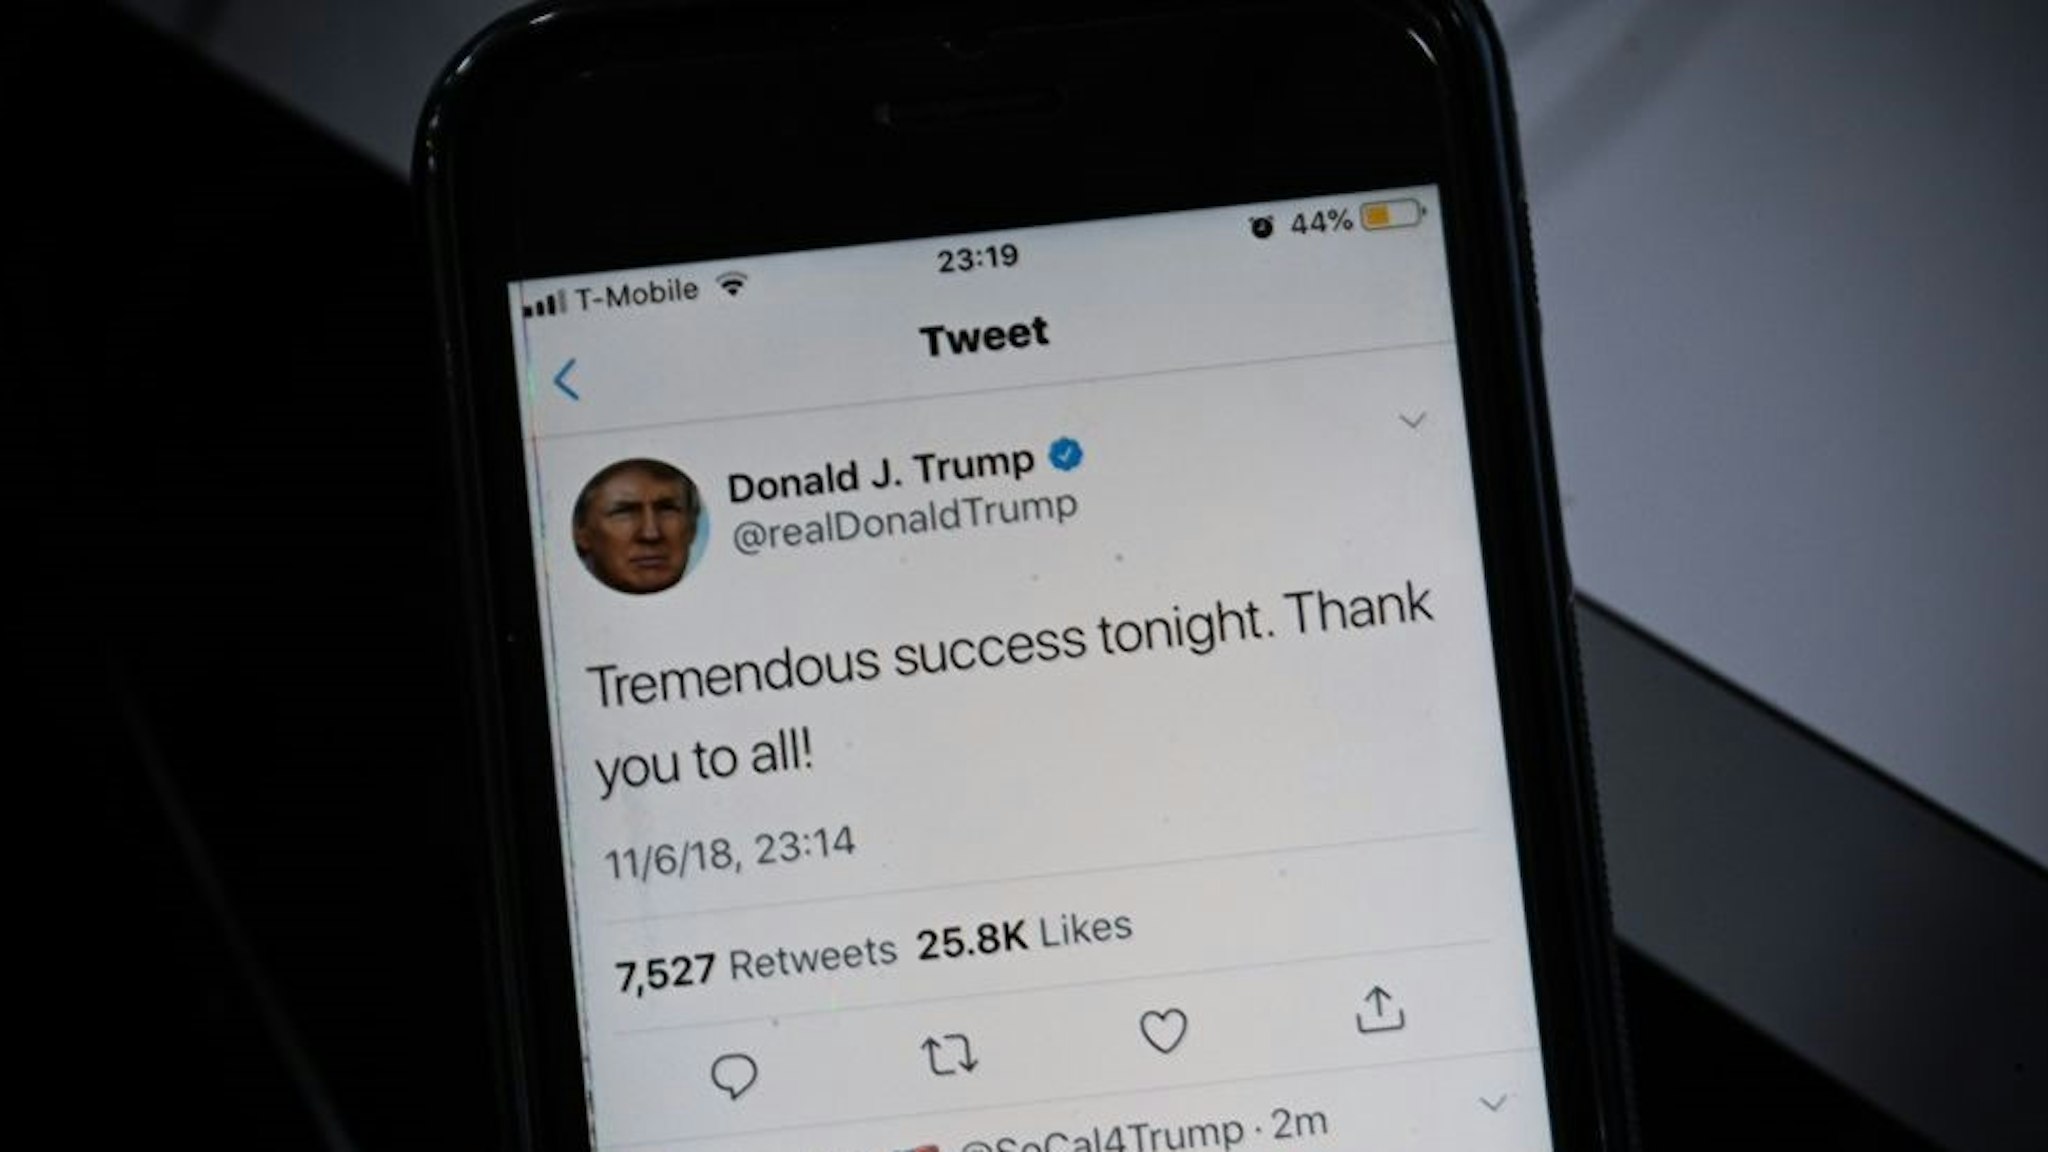 TOPSHOT - A smartphone shows a tweet by US President Donald Trump saying "Tremendous success tonight" after most of the result of the US midterm elections were called by US Media on November 06, 2018 in Washington, DC. - President Donald Trump called Tuesday's midterm congressional elections a "tremendous success," despite his Republican Party losing control of the House of Representatives. The Republicans held on to the Senate and narrowly survived a number of big individual races, including in Florida. The Democrats now control the lower house for the first time in eight years. (Photo by Eric BARADAT / AFP) (Photo credit should read